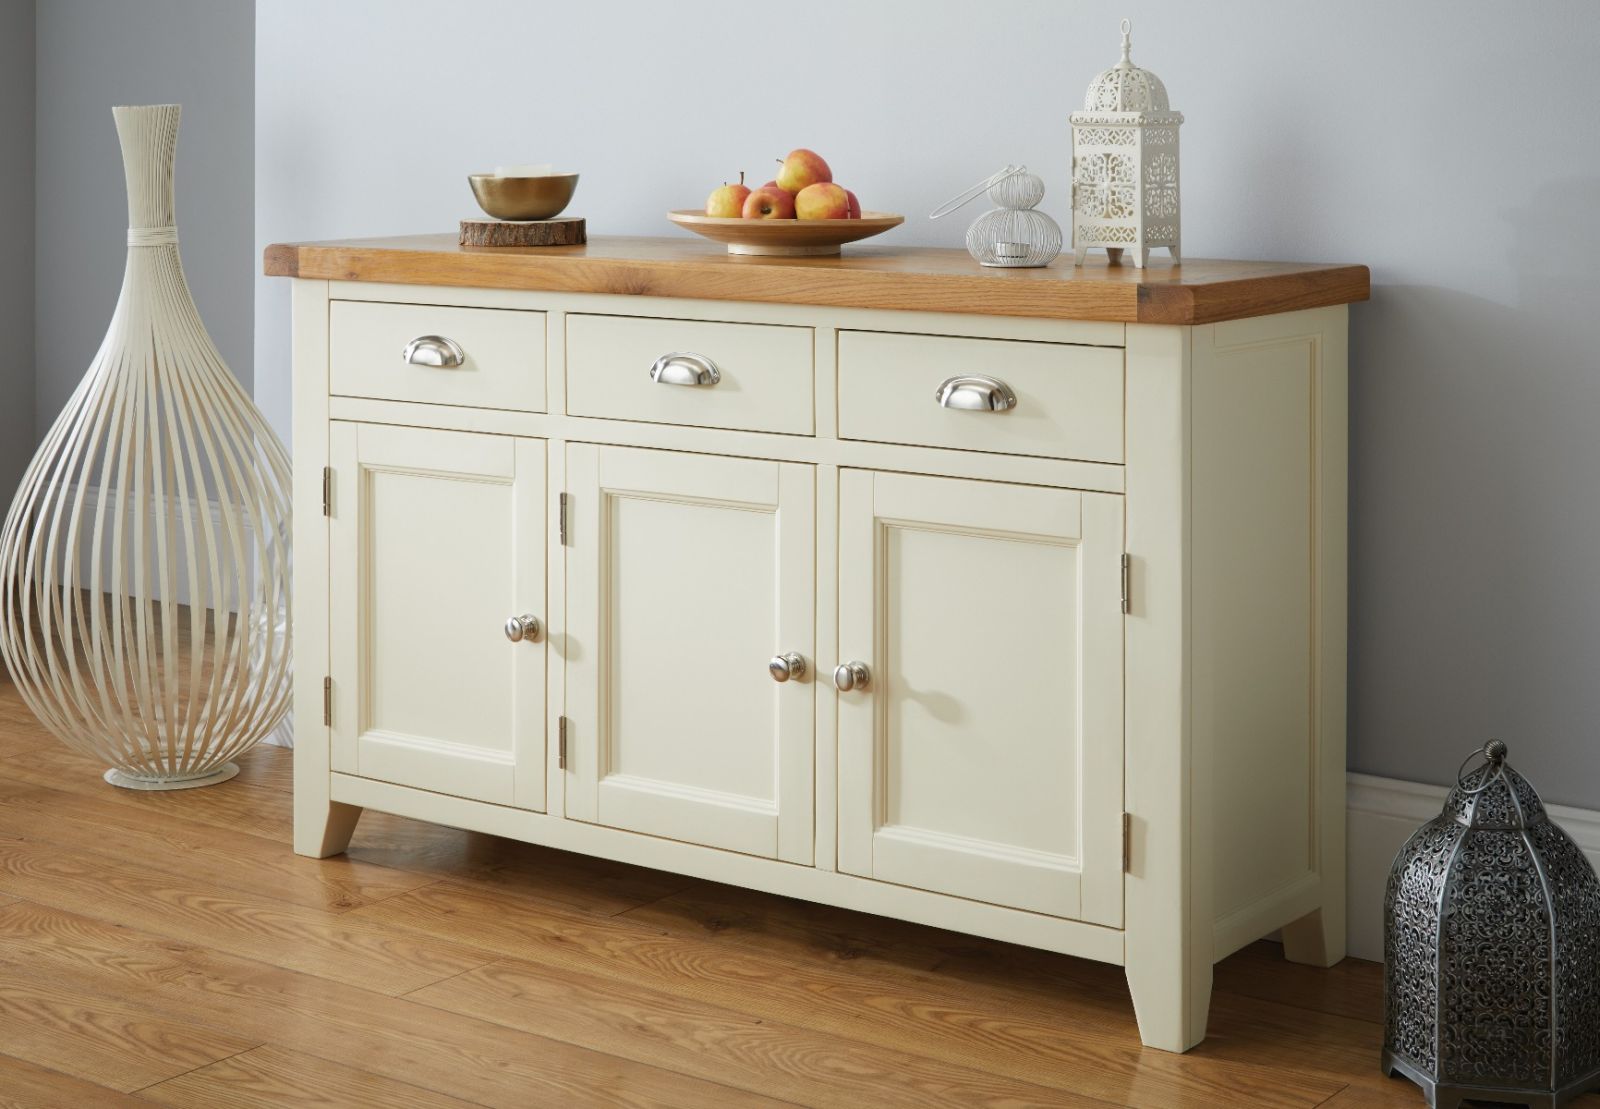 Country Cottage 140cm Cream Painted Large Oak Sideboard - 10% OFF WINTER SALE